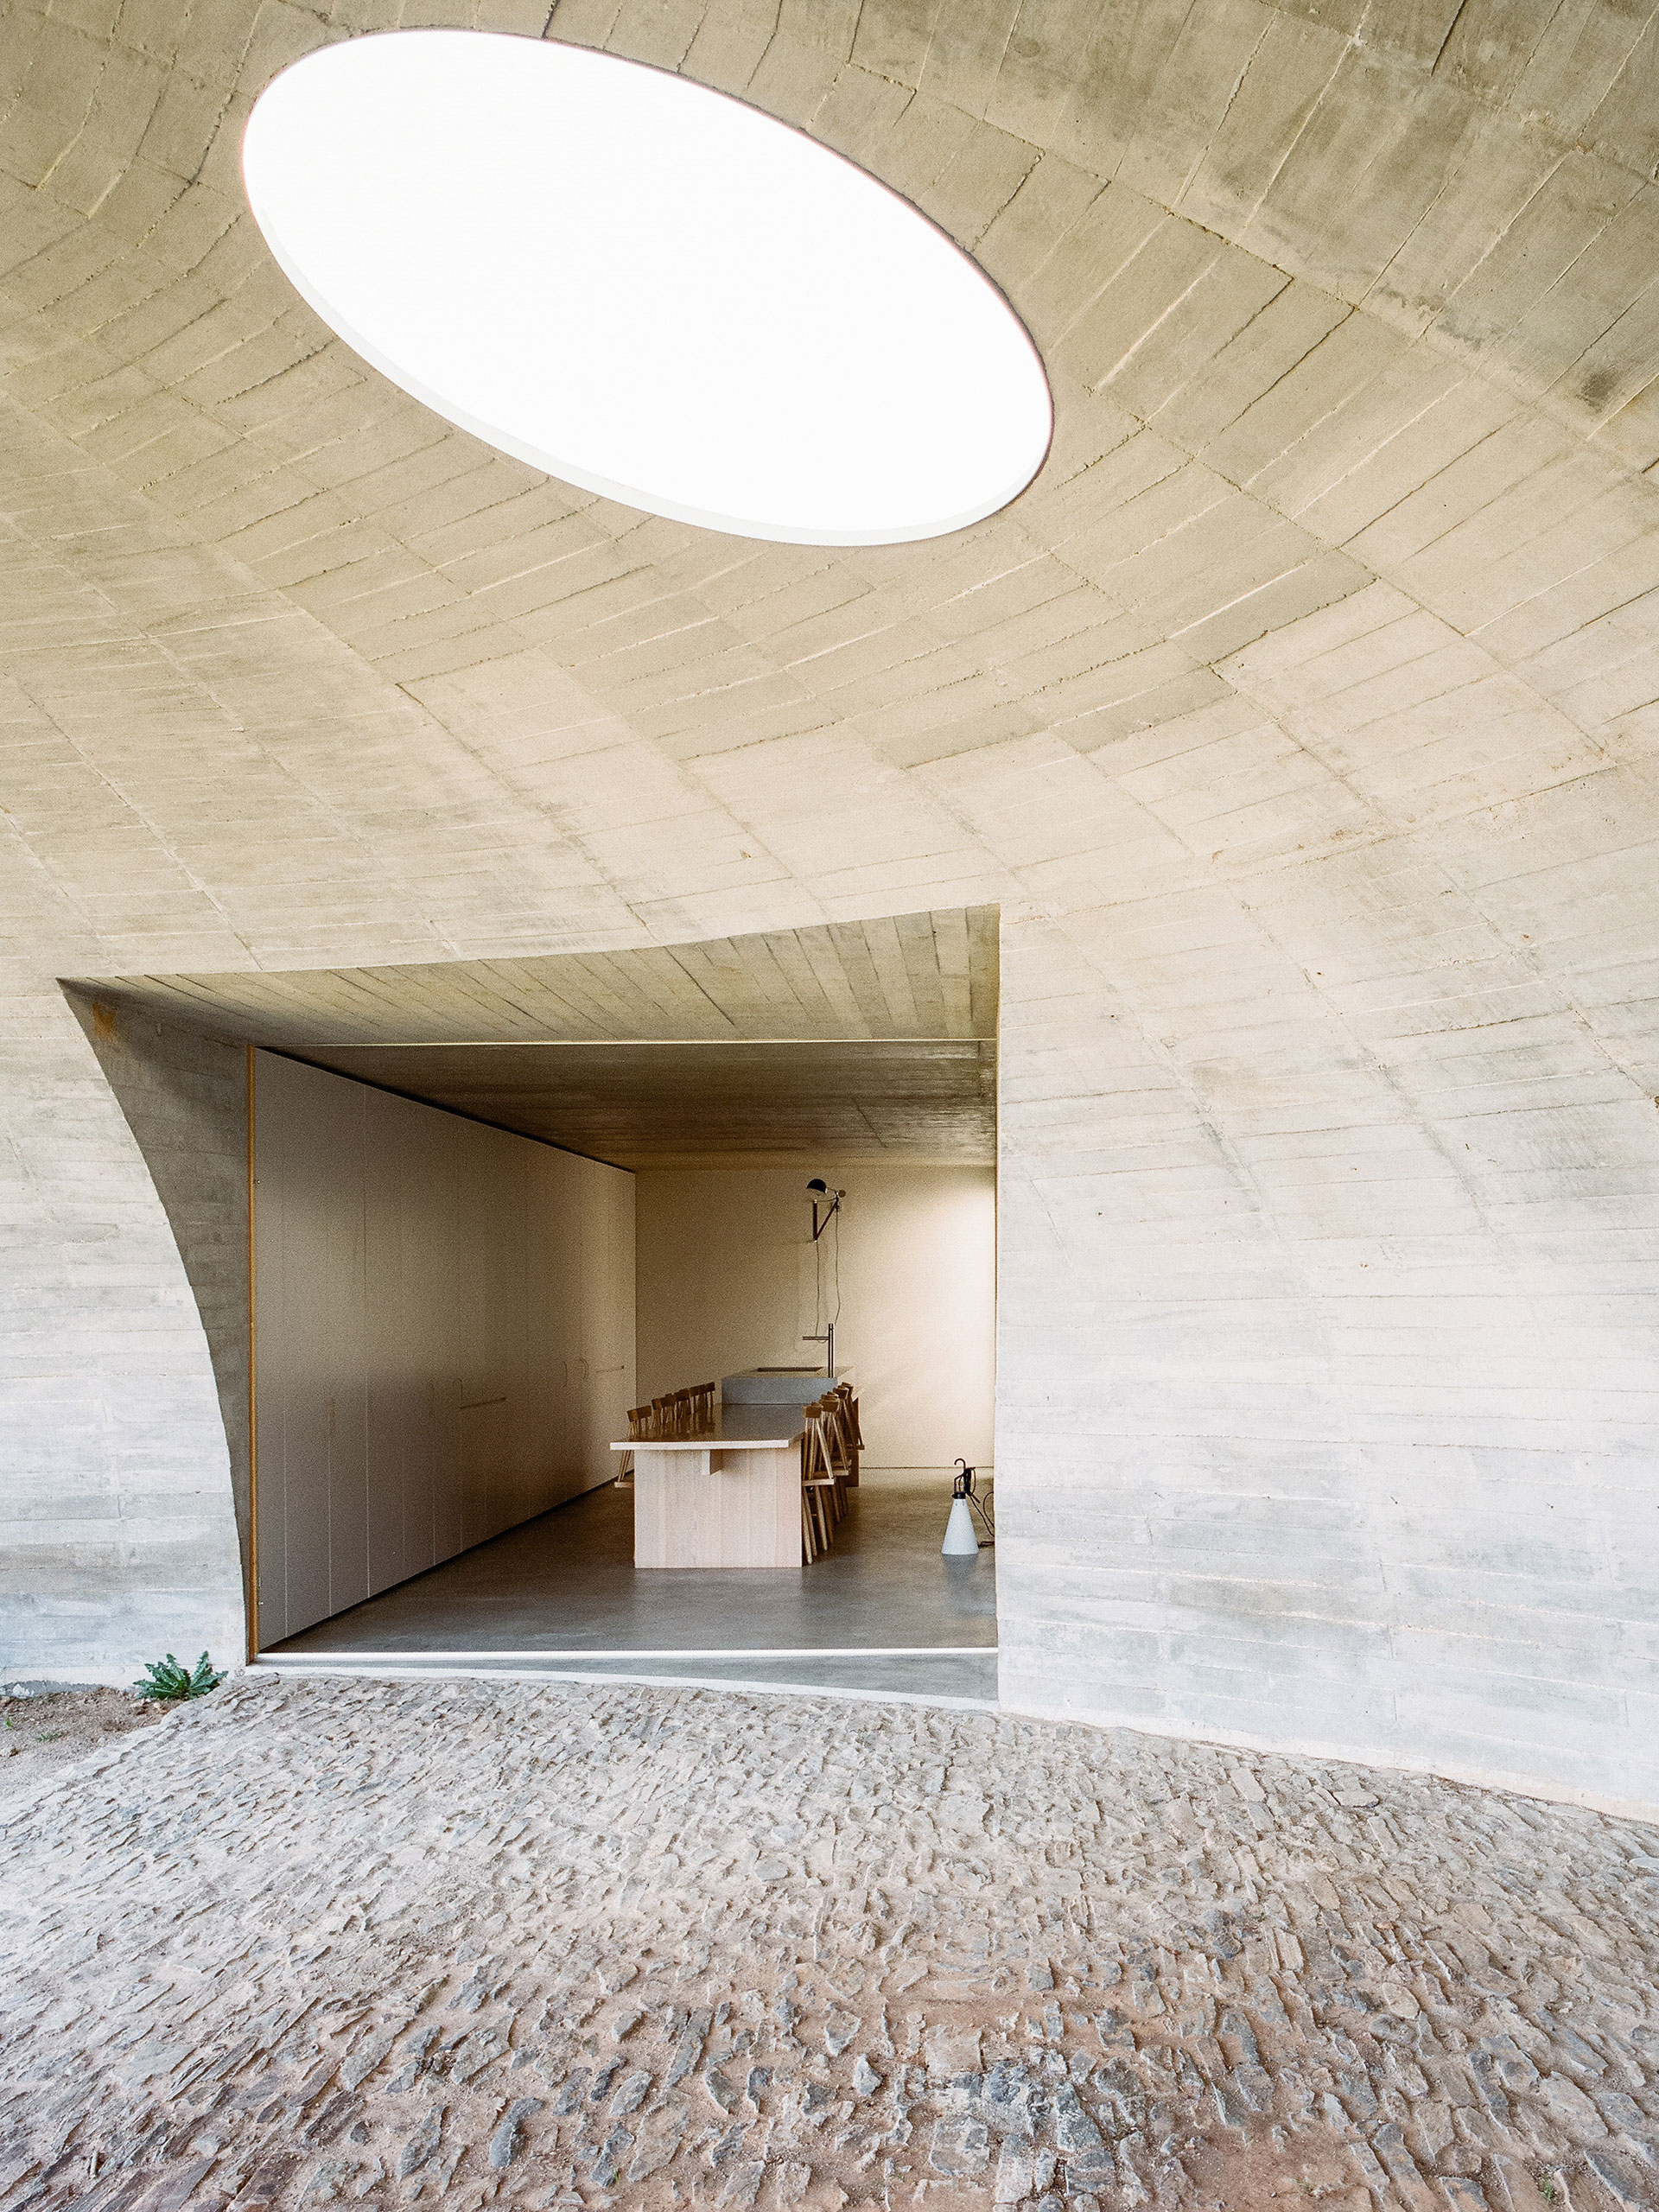 House in Monsaraz by Aires Mateus Architects.
Photo by Rui Cardoso.